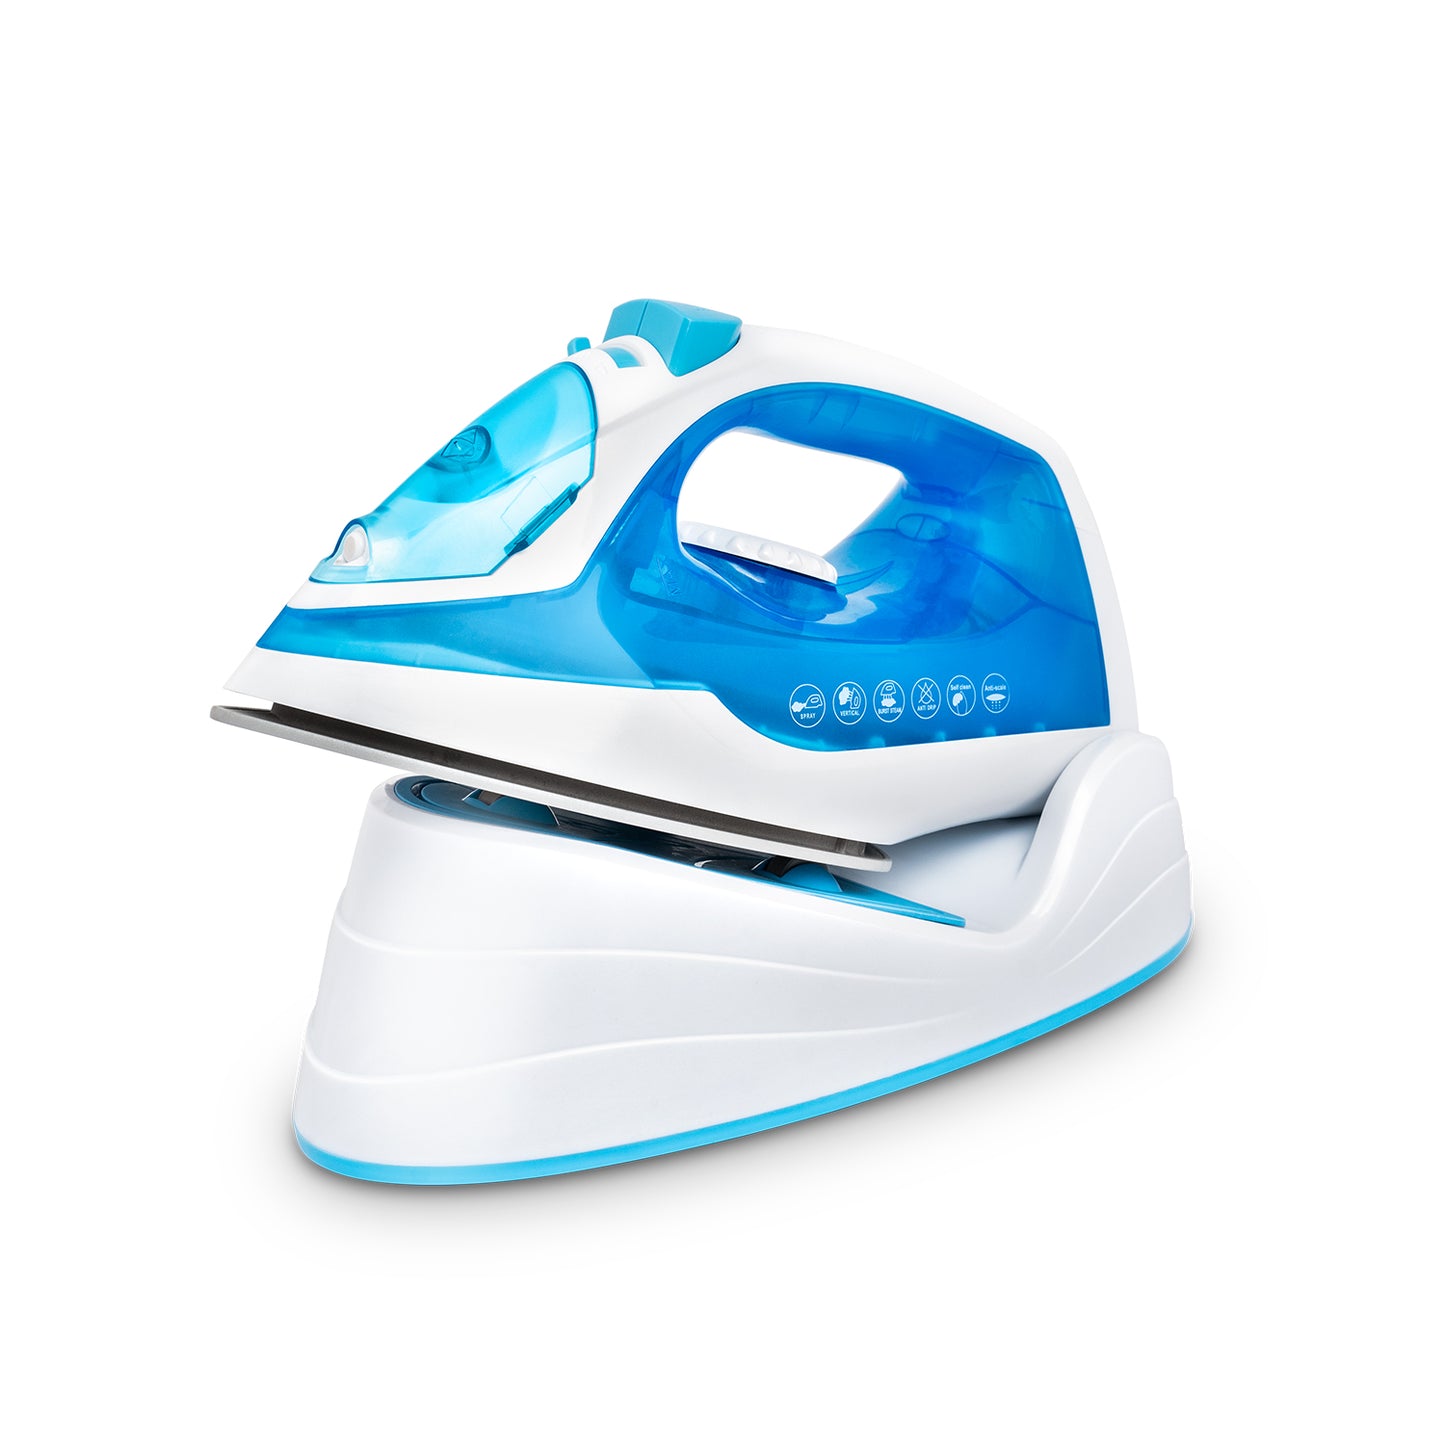 Wipro Elato GS206 2in1 Cord Plus Cordless Steam Iron|Dry&Steam Iron|1250 Watts|Scratch Resistant Ceramic Soleplate|Vertical&Horizontal Steaming|Anti Calc|Anti Drip|Autoclean Tech|2 Years Warranty